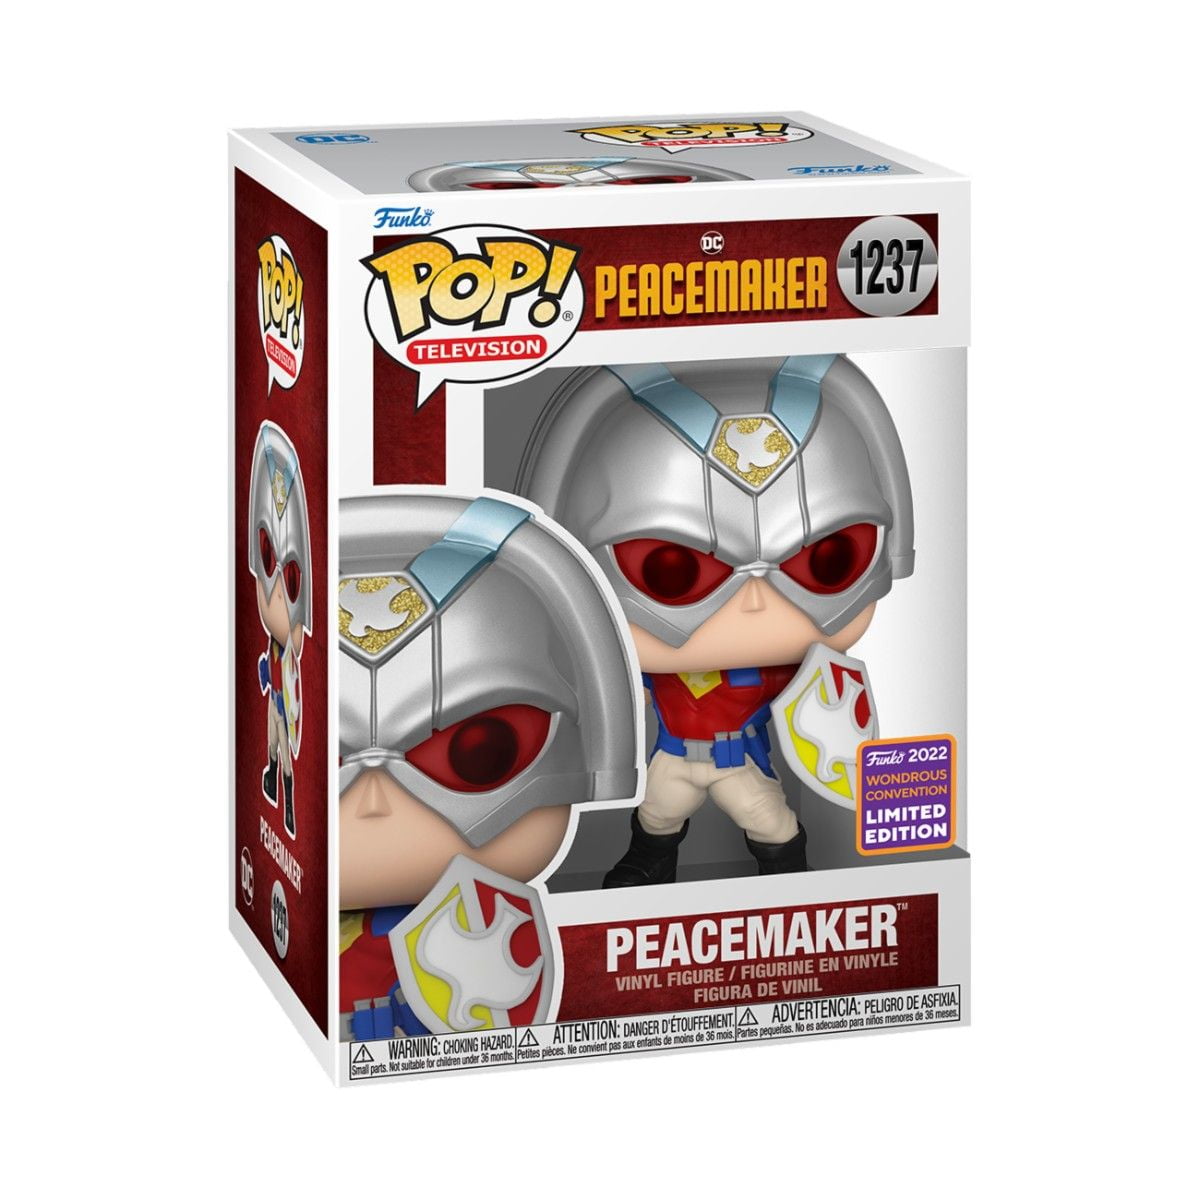 Peacemaker with shield - Peacemaker - Funko POP! Television Vinyl (1237)